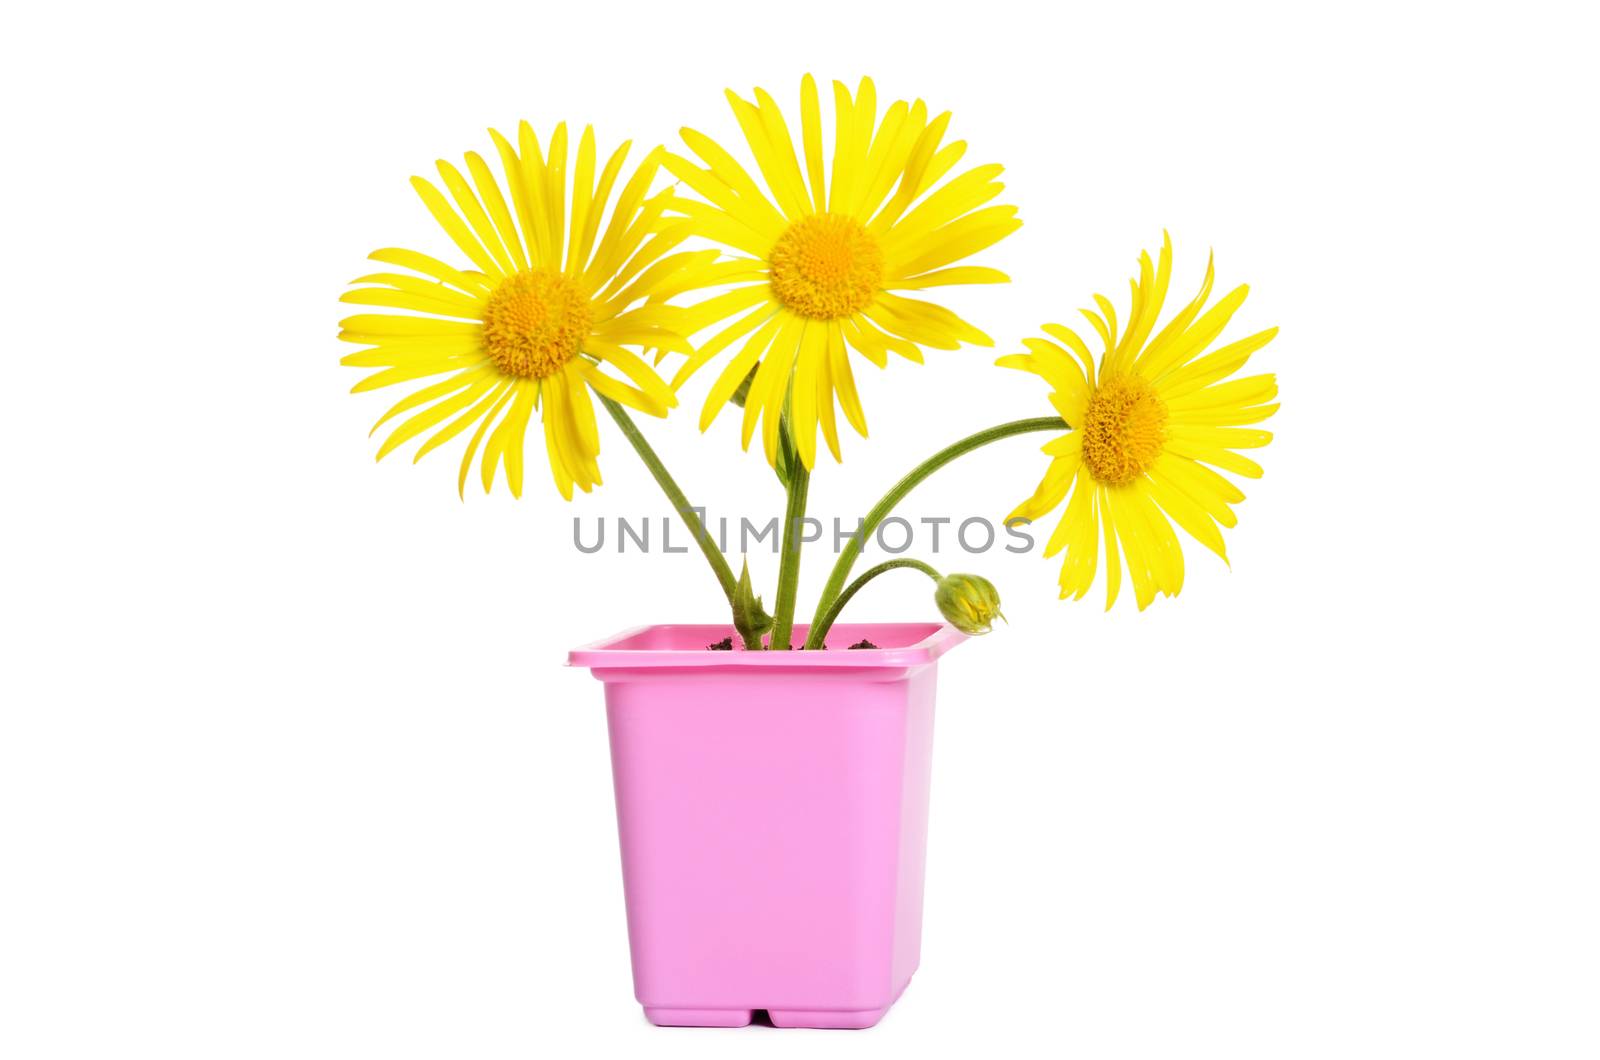 Yellow daisies in a flower pot by SvetaVo